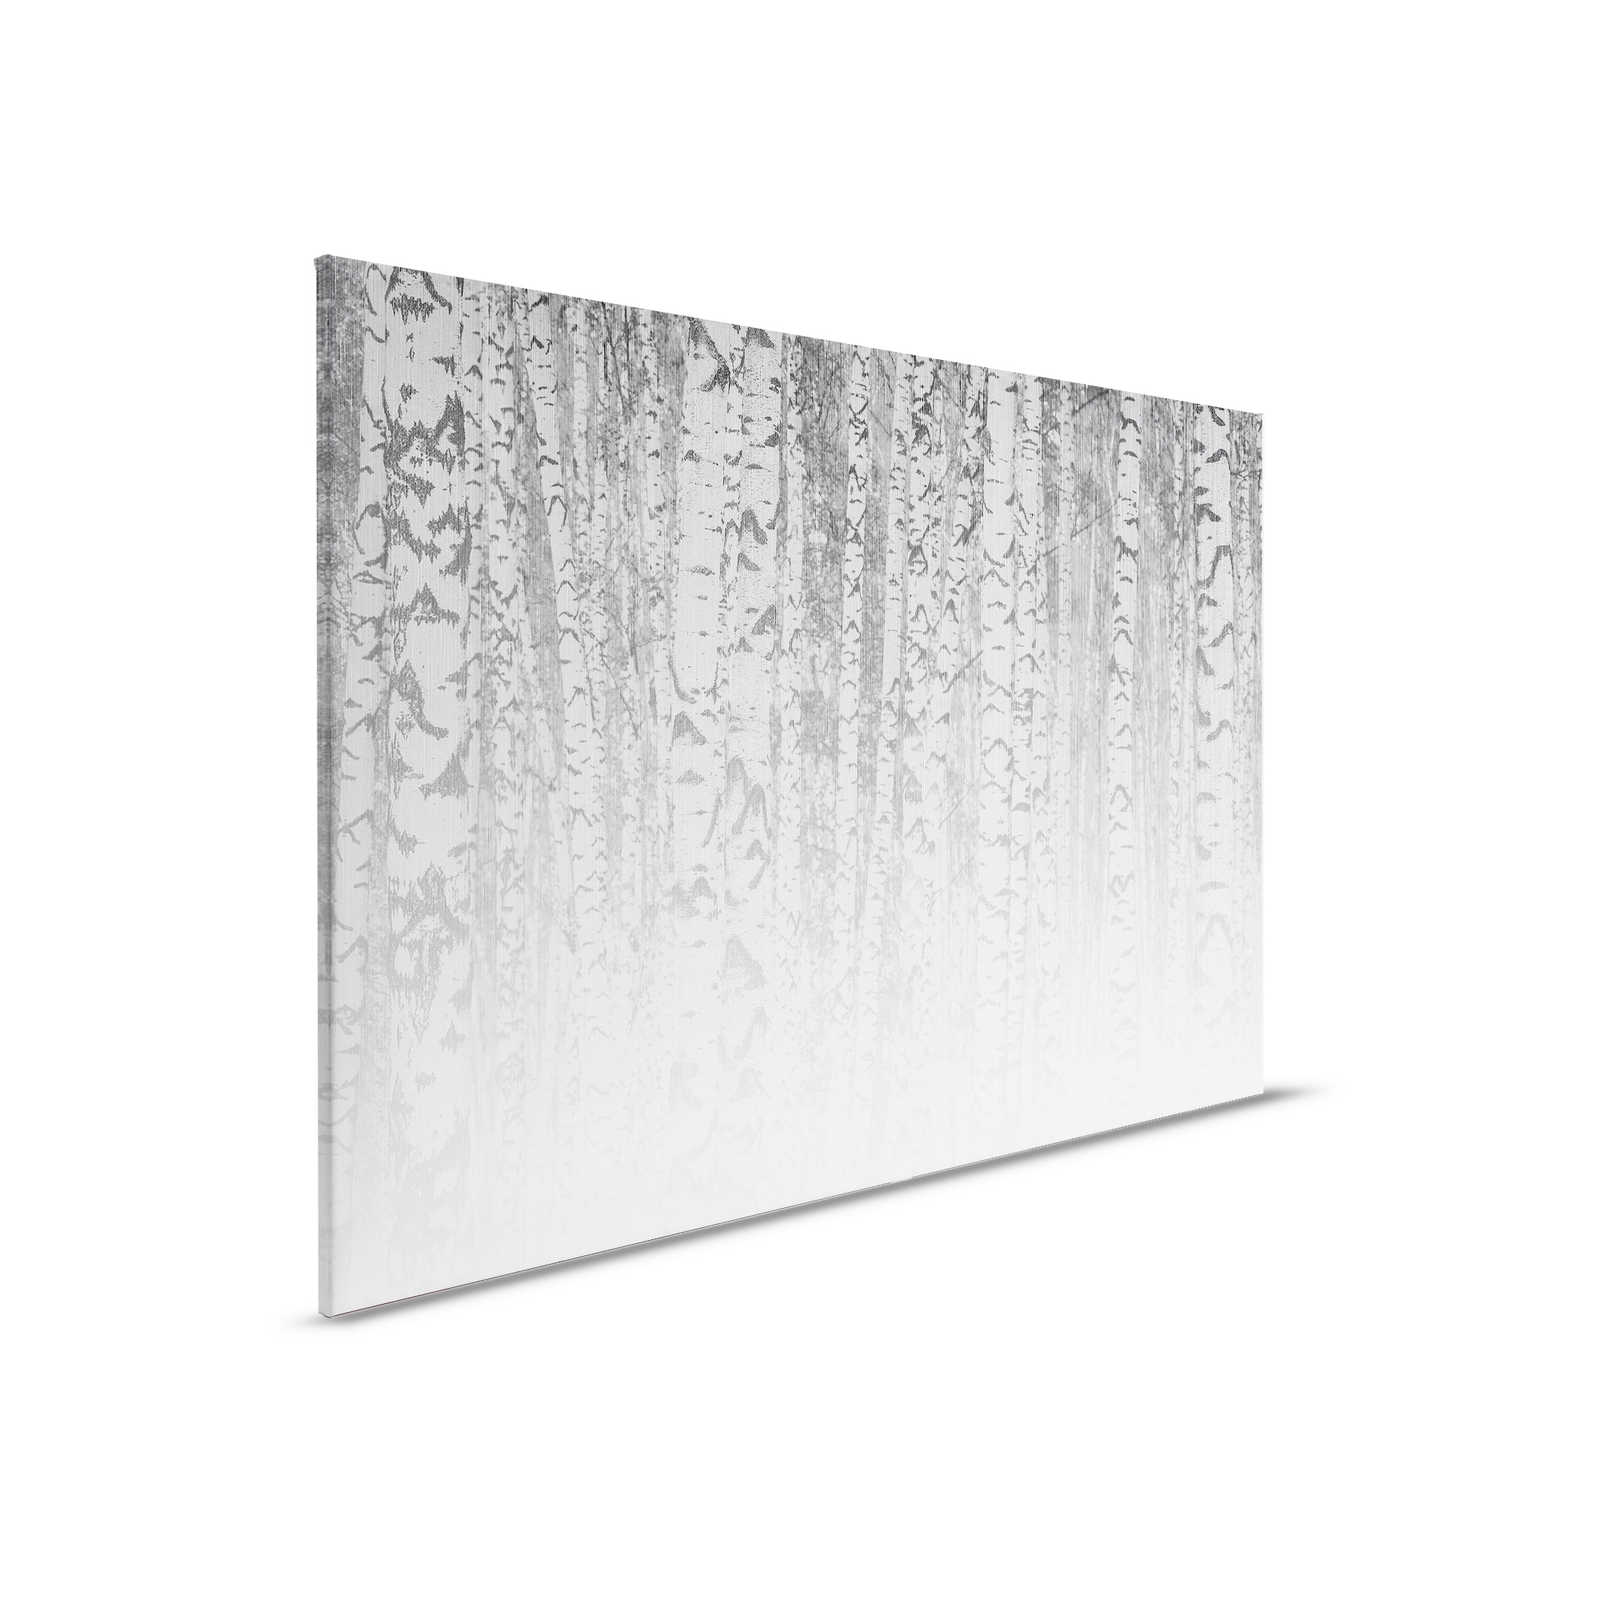         Canvas painting light birch tree trunks in misty forest - 0,90 m x 0,60 m
    